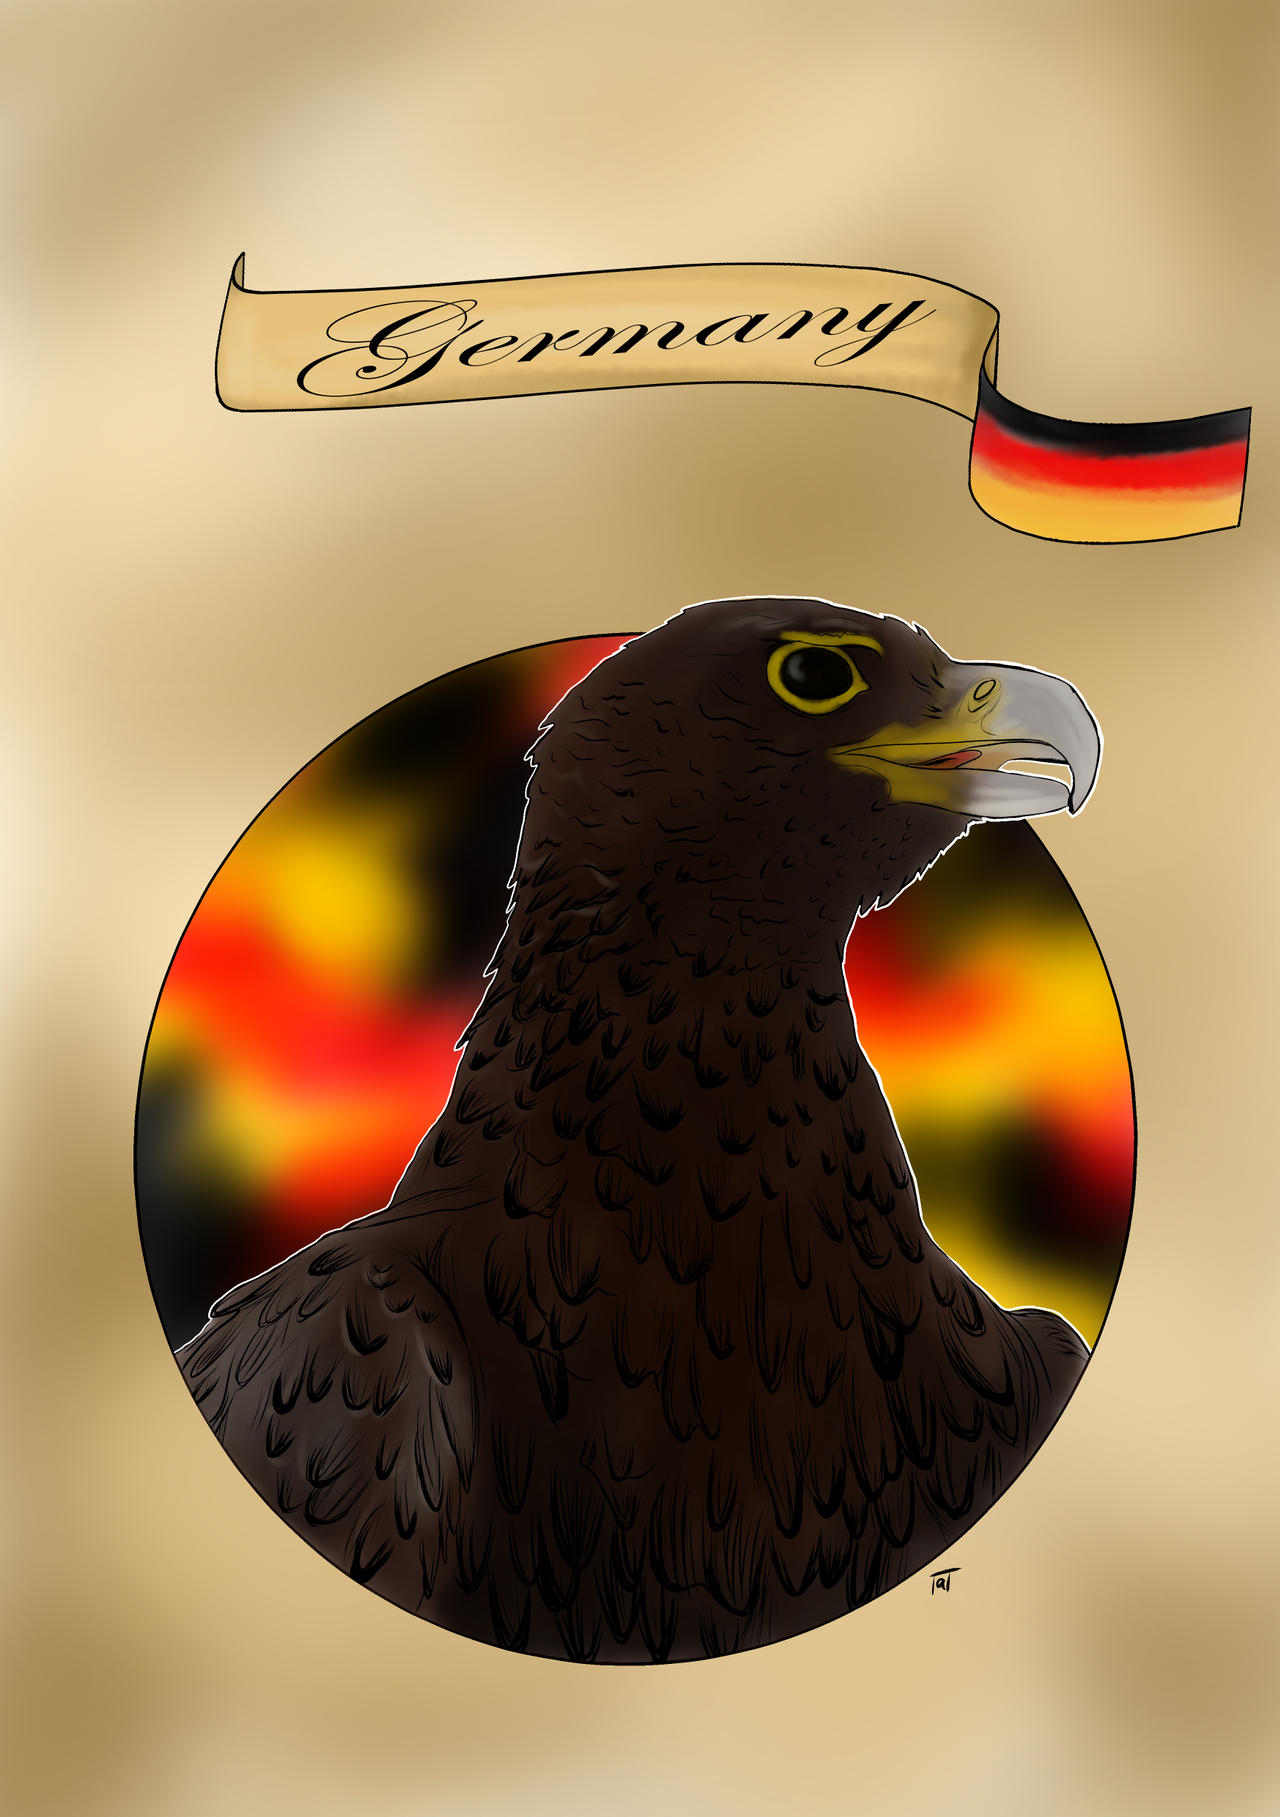 national animal series: #1 Germany by PiArt98 on DeviantArt